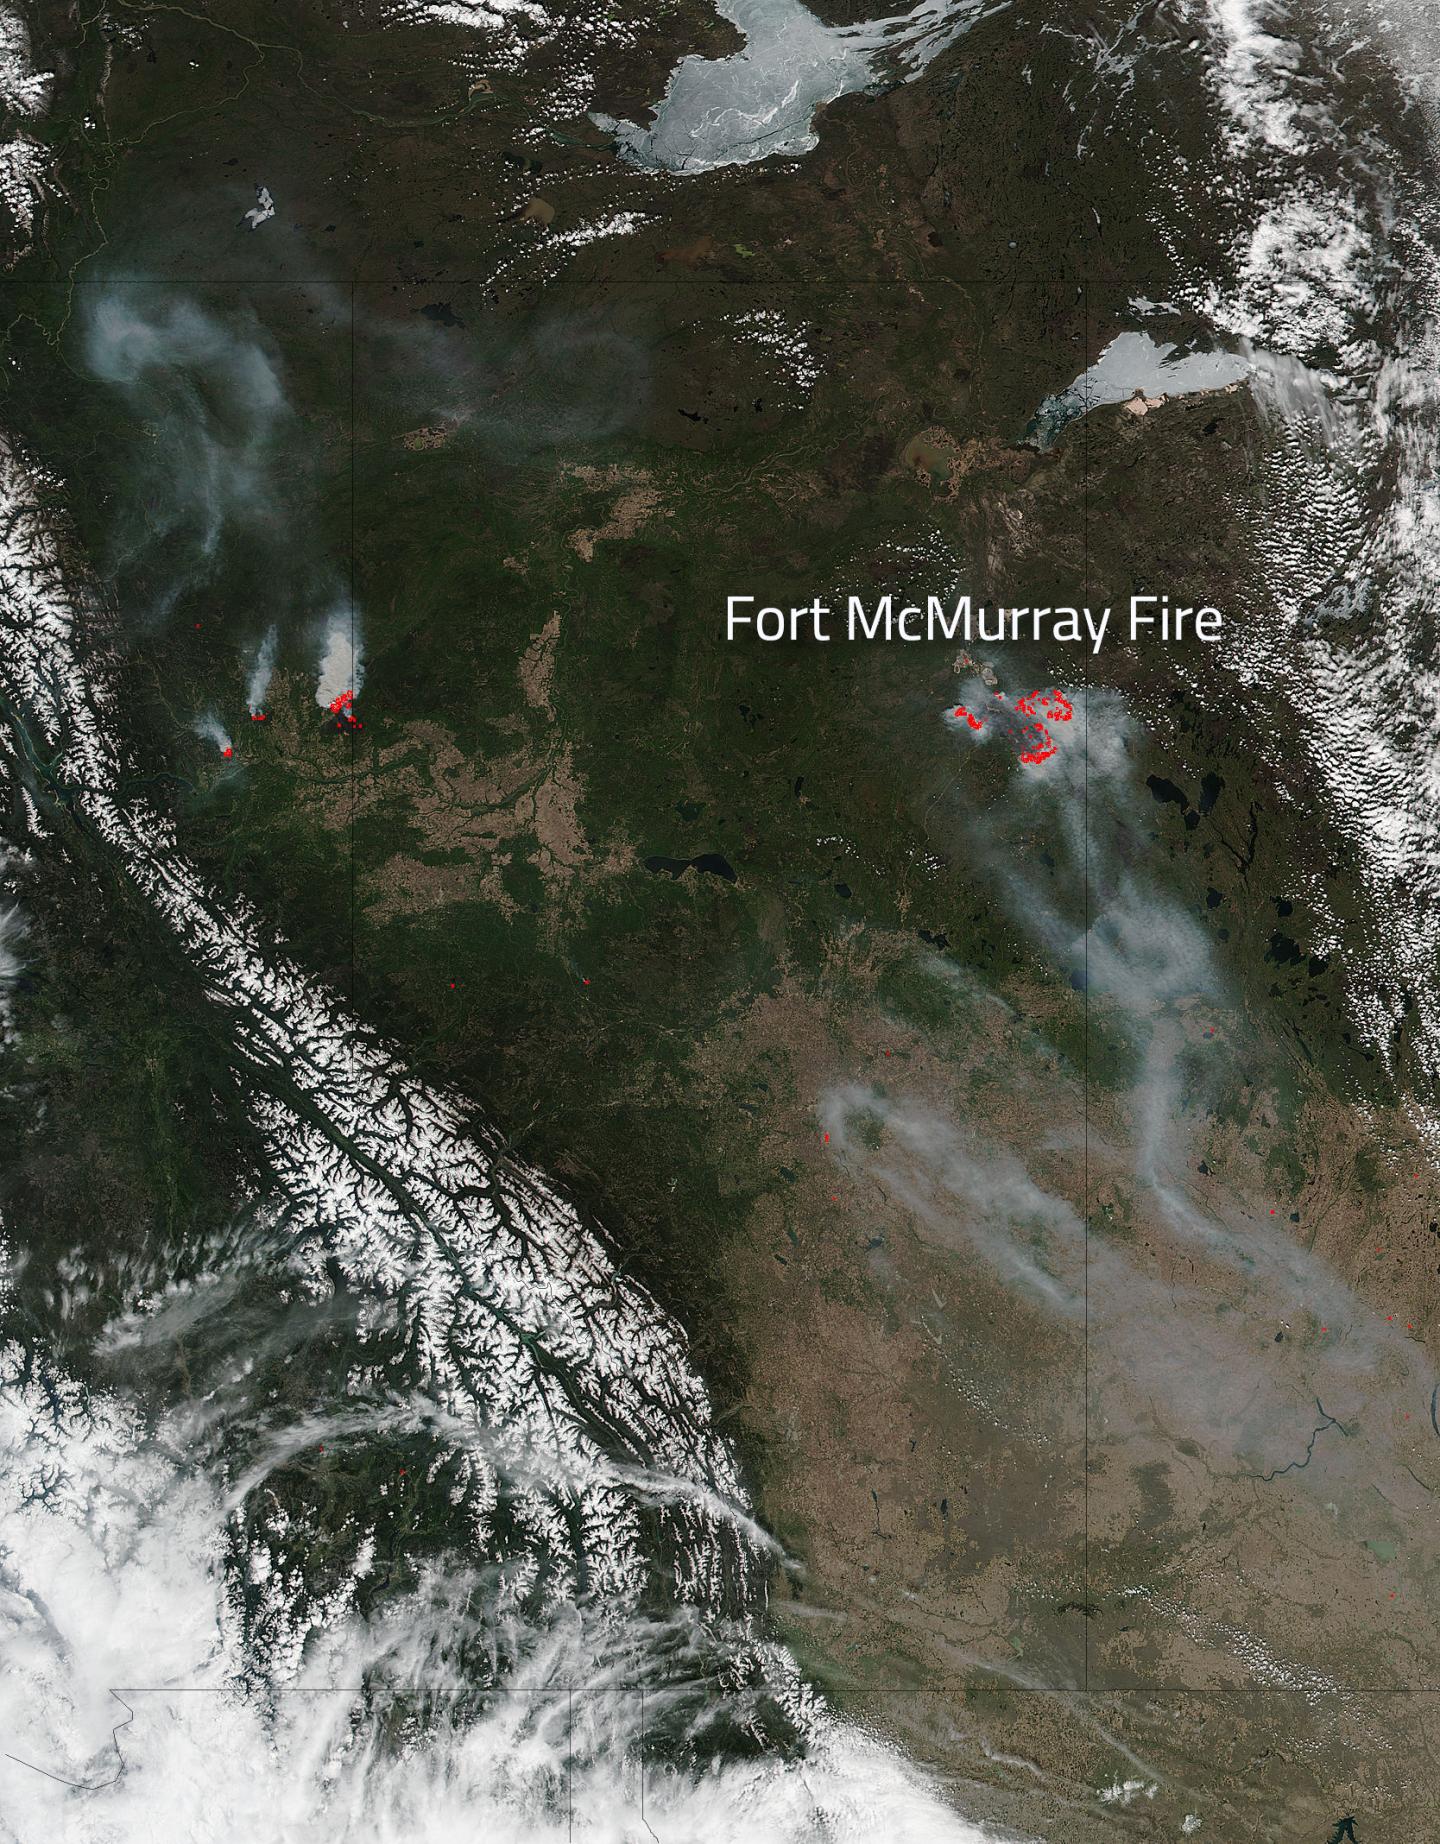 Fort McMurray fire continues in Alberta (e) Science News